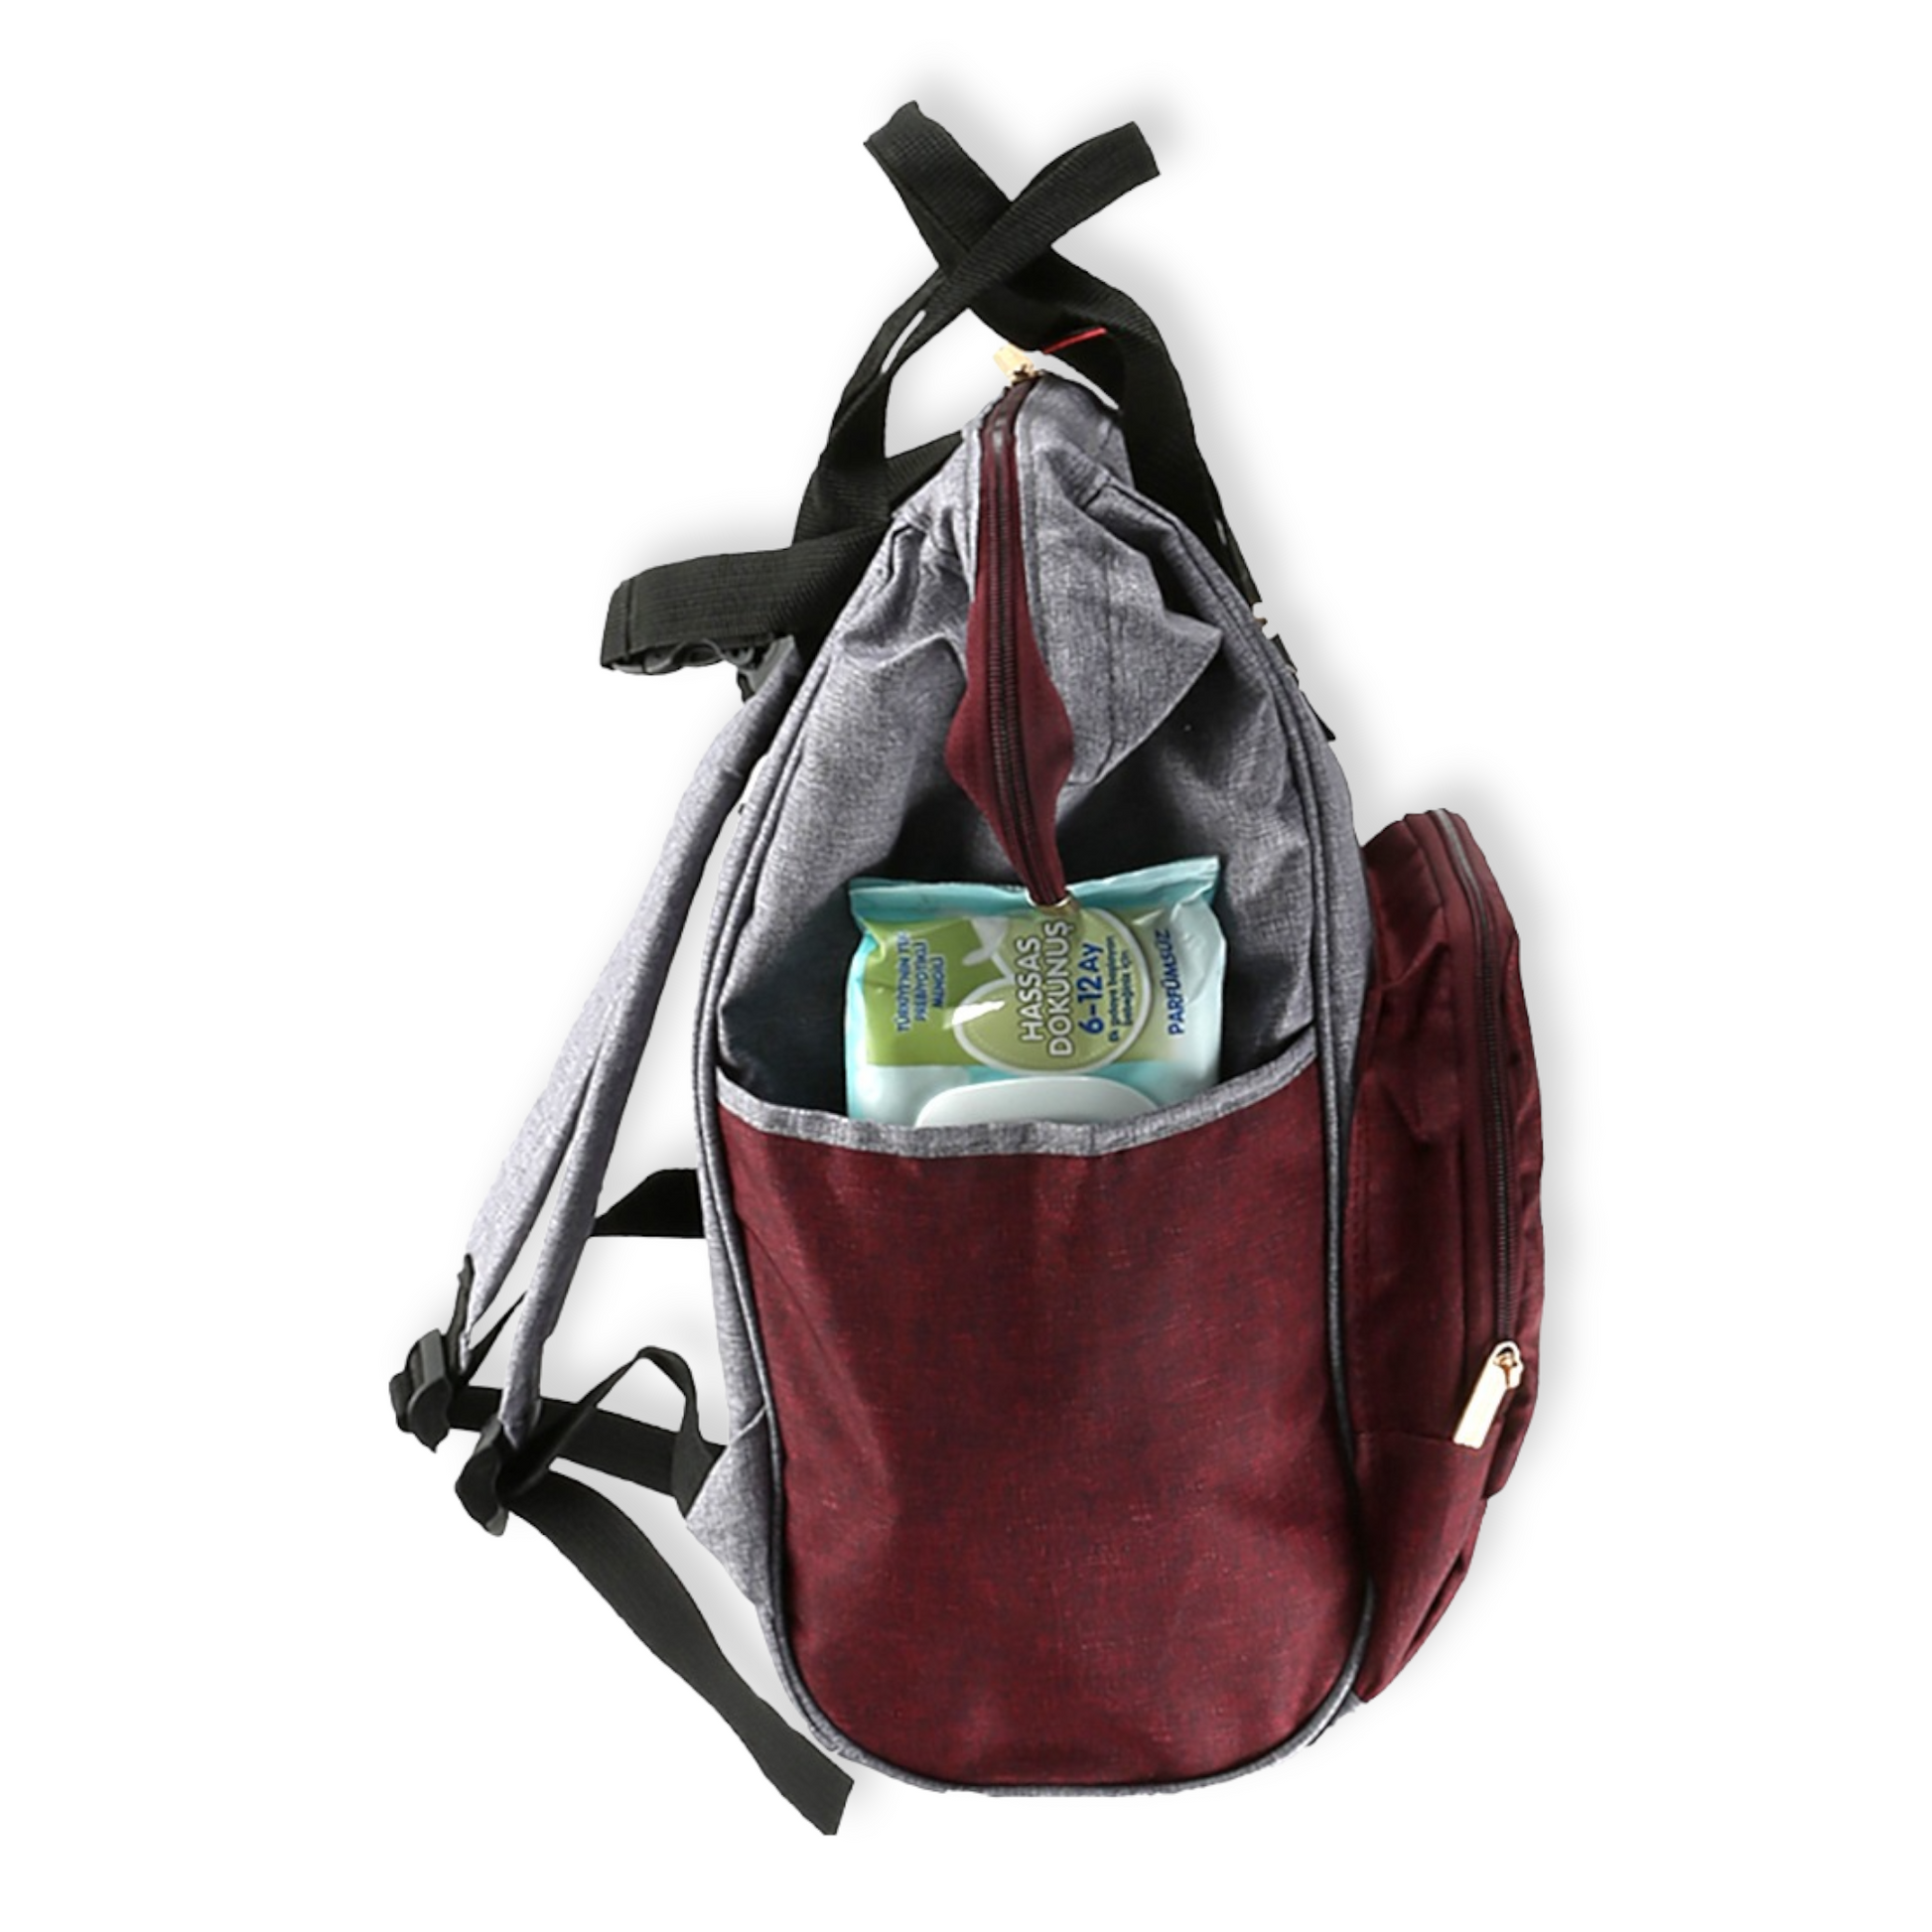 Burgundy and Grey Mommy Bag-Bag, Bags, Burgundy, catbabygear, catbag, Changing, Diapers, Grey, Maternity, Nappy, Nursery, Travel-Safe Line-[Too Twee]-[Tootwee]-[baby]-[newborn]-[clothes]-[essentials]-[toys]-[Lebanon]